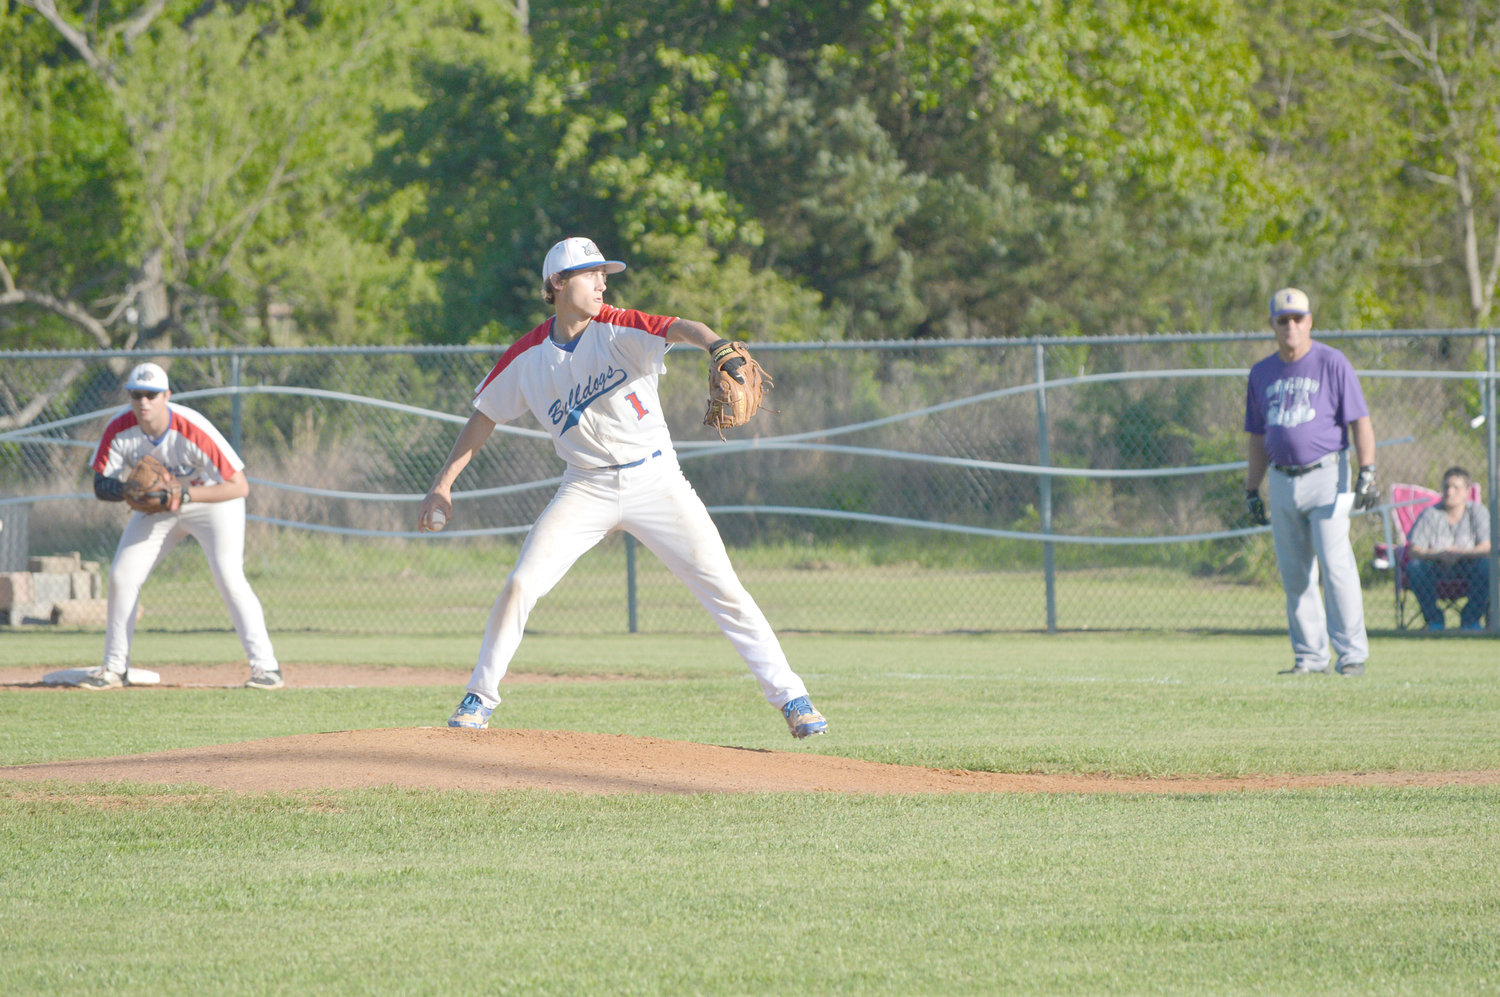 Jake Farmer fires a pitch from the mound in Friday’s  game against Eustace.